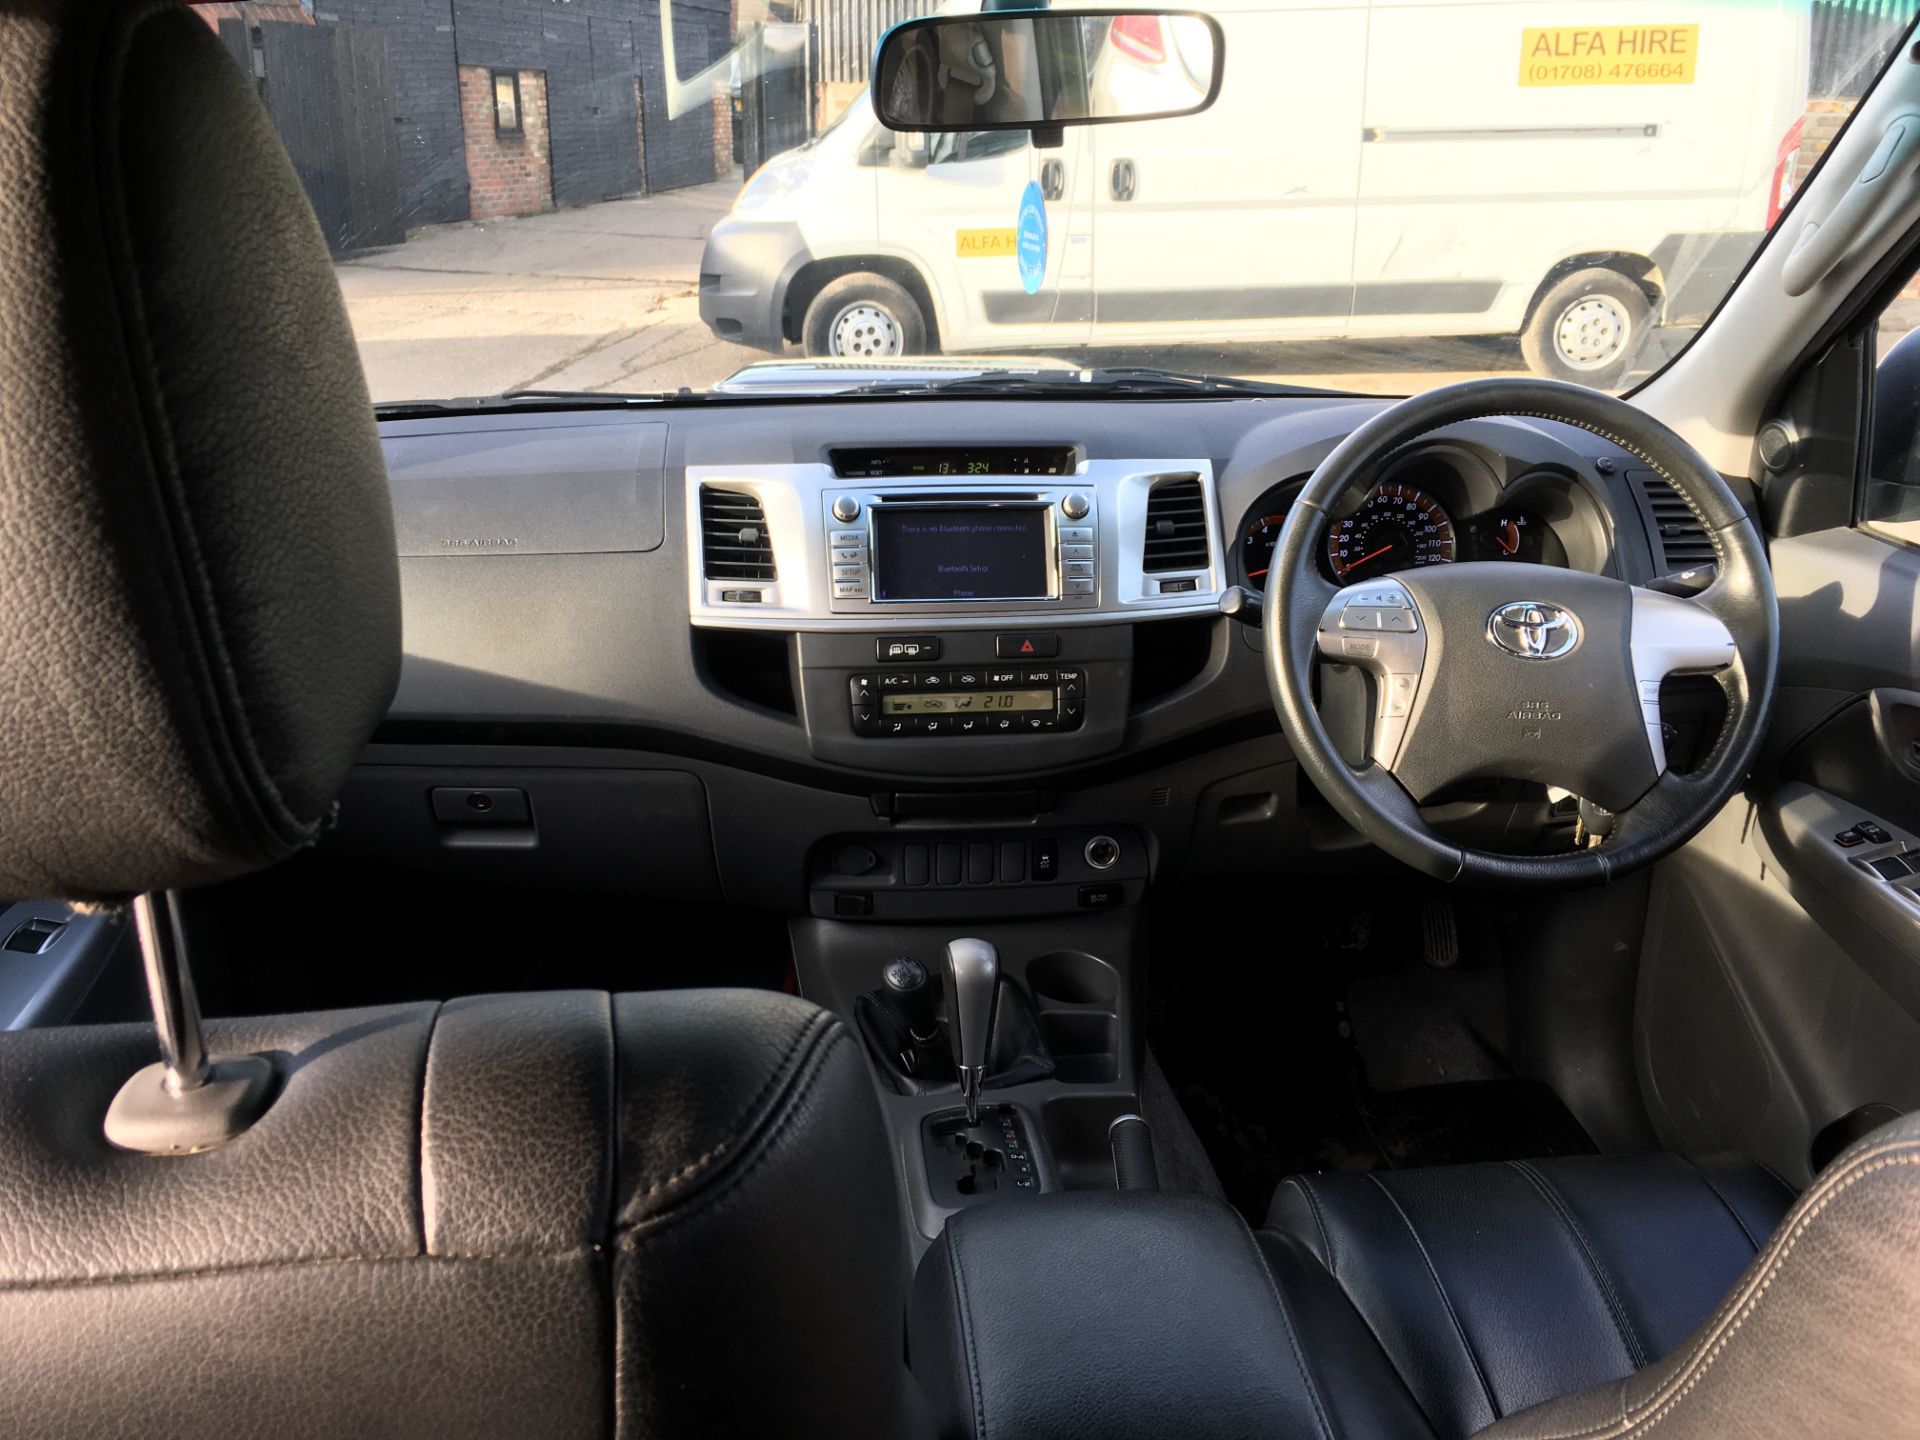 Toyota Hilux Invincible Double Cab D-4D 4WD 171 Auto, LR63 JVX, First Registered 10th October - Image 7 of 10